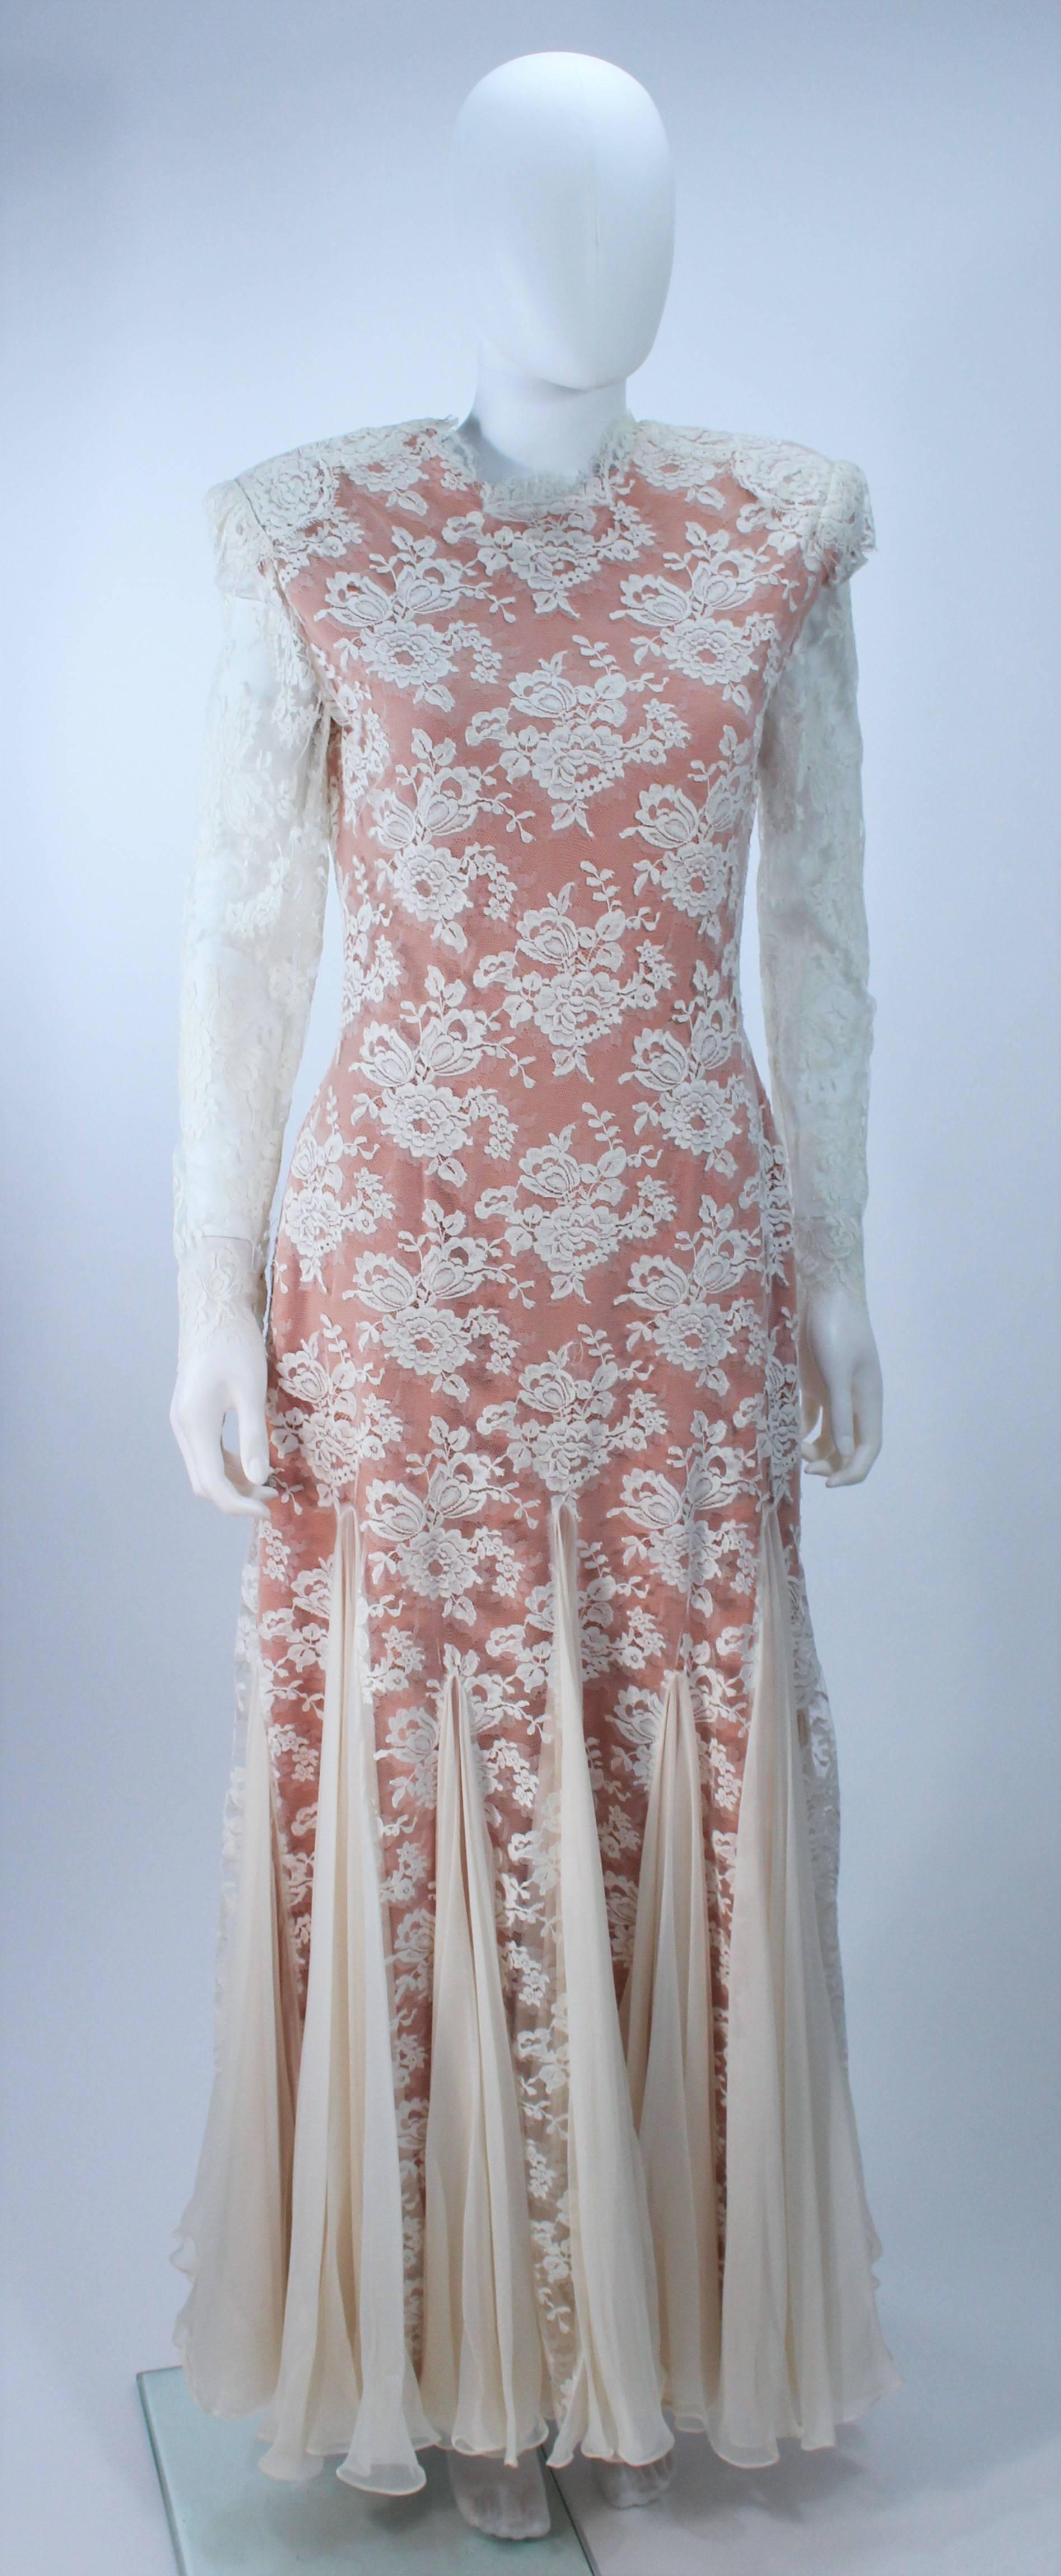  This Travilla design of an off white lace with a nude underlay. Features structured shoulders with pads and godet inserts at the hem. There is a zipper closure and scalloped edges throughout. In great vintage condition. 

  **Please